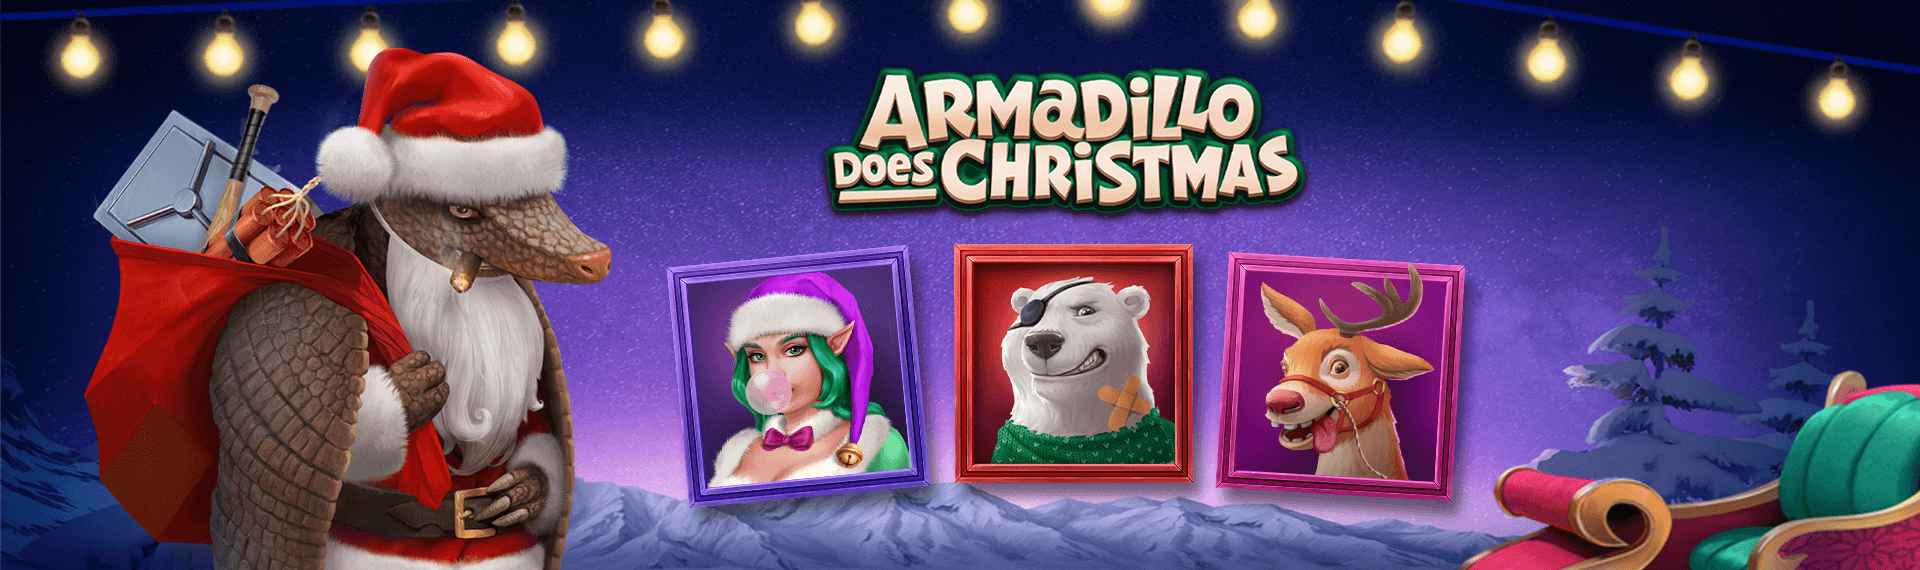 Armadillo Does Christmas 2023 Screenshot <br />
<b>Notice</b>:  Undefined variable: key in <b>/var/www/html/wp-content/themes/armadillo/page-game.php</b> on line <b>37</b><br />
1